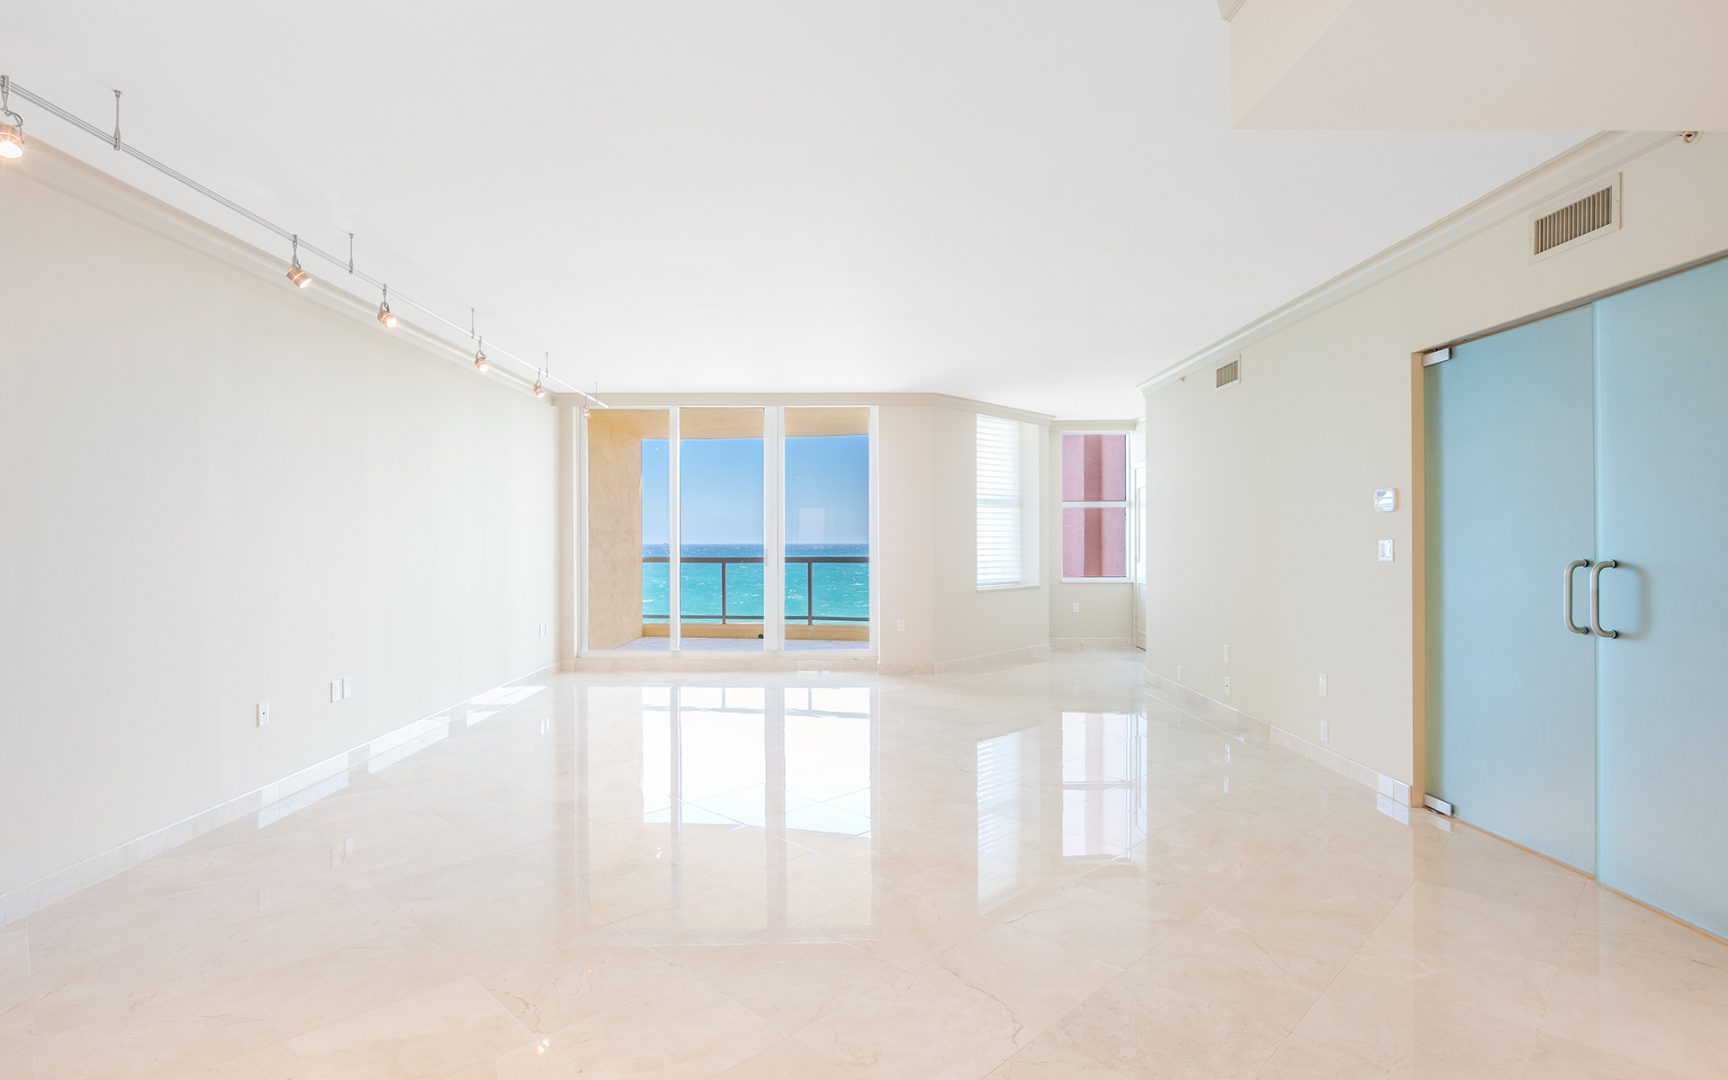 Residence 15D, Tower II at The Palms, Luxury Oceanfront Condos in Fort Lauderdale, Florida 33305.